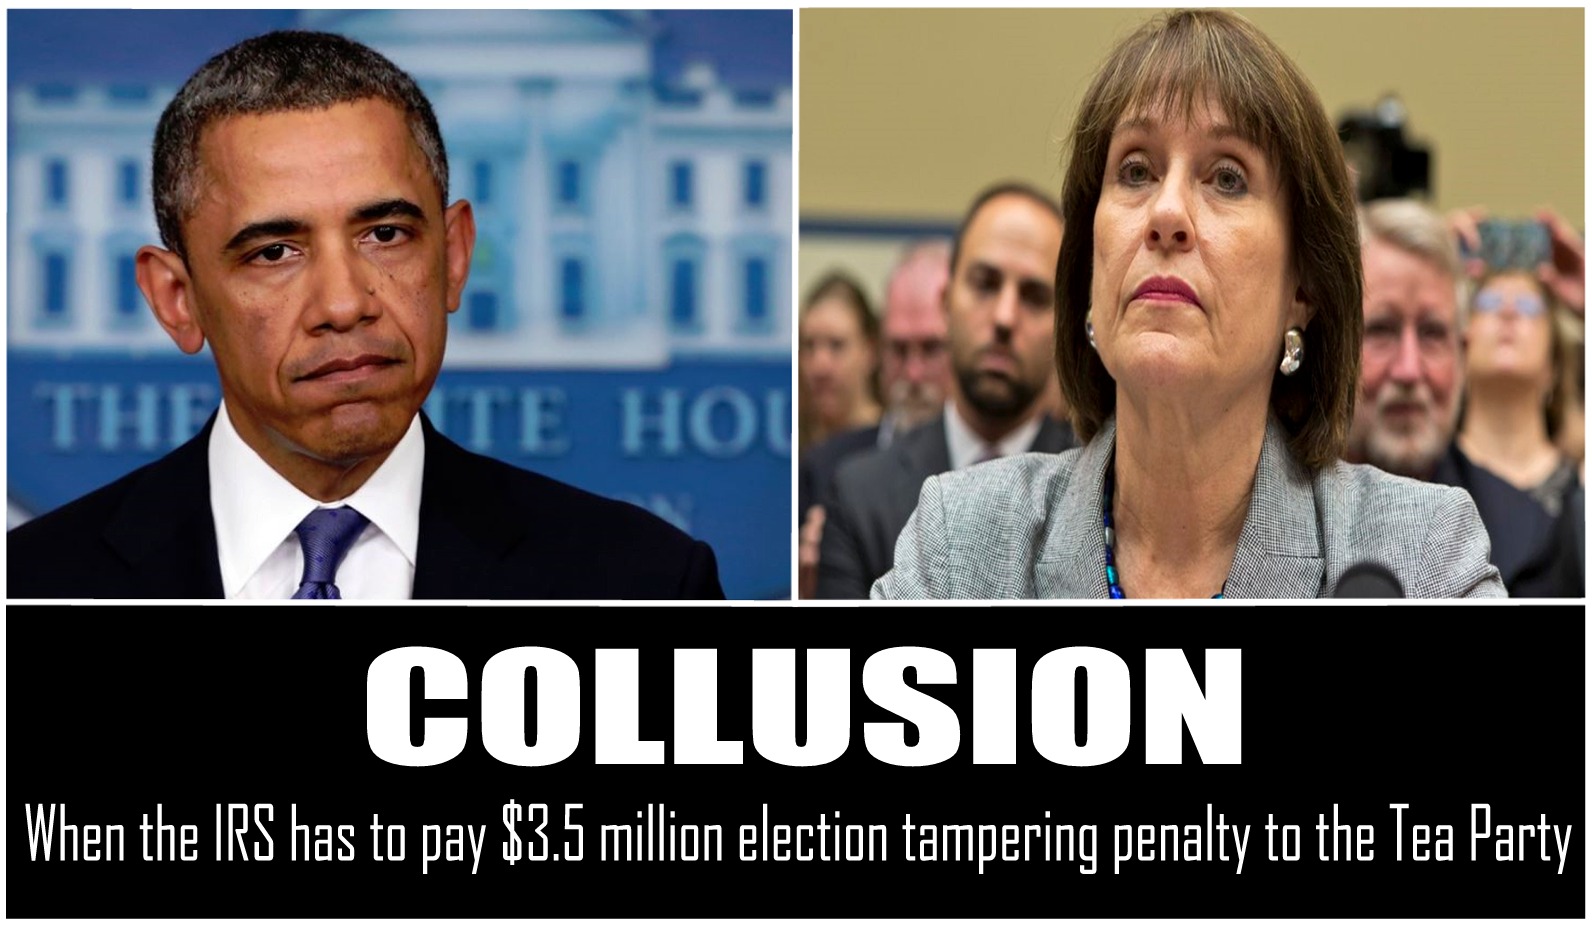 memes - public speaking - Thite Hot Collusion | When the Irs has to pay $3.5 million election tampering penalty to the Tea Party